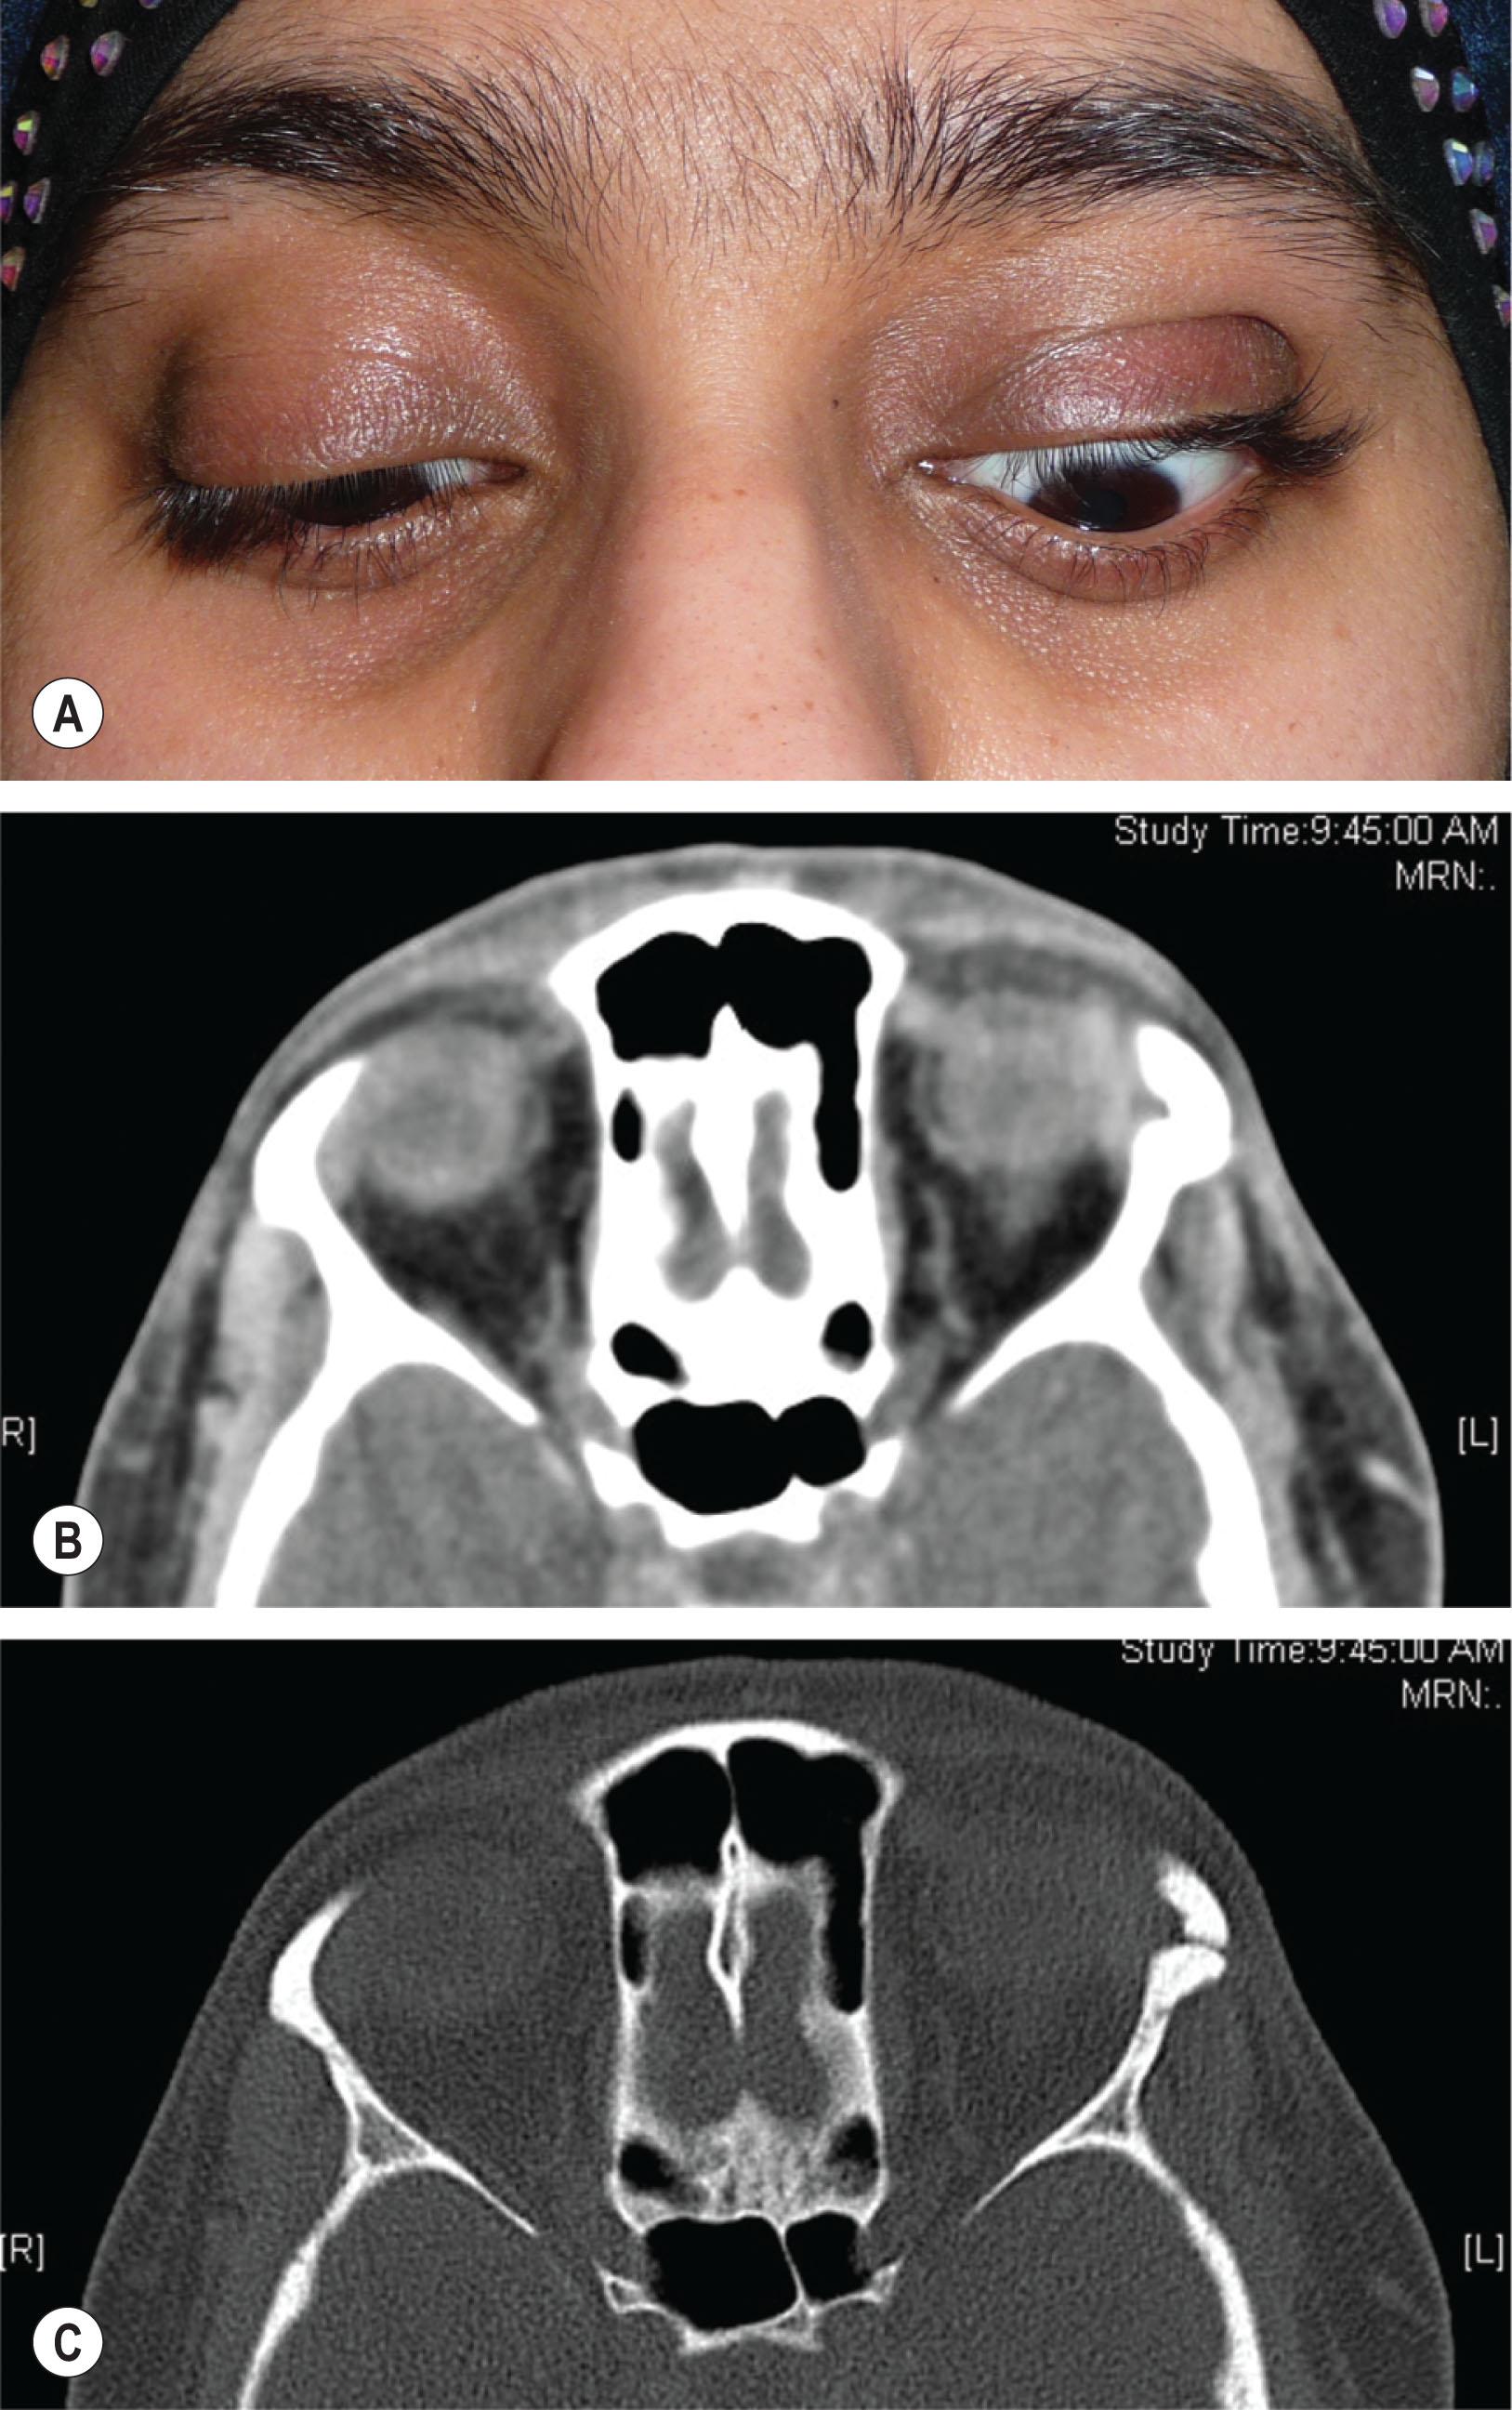 Fig. 27.7, An 18-year-old girl had undergone incomplete removal of a lateral orbital dermoid, leading to a discharging fistula, recurrent infection, and upper lid lag on downgaze due to scarring. (B) An axial computed tomography scan shows a small residual dermoid cyst adjacent to a bone defect. (C) An axial bone-window setting shows a small defect in the lateral orbital rim. There was a small amount of dermoid in the adjacent temporal fossa.